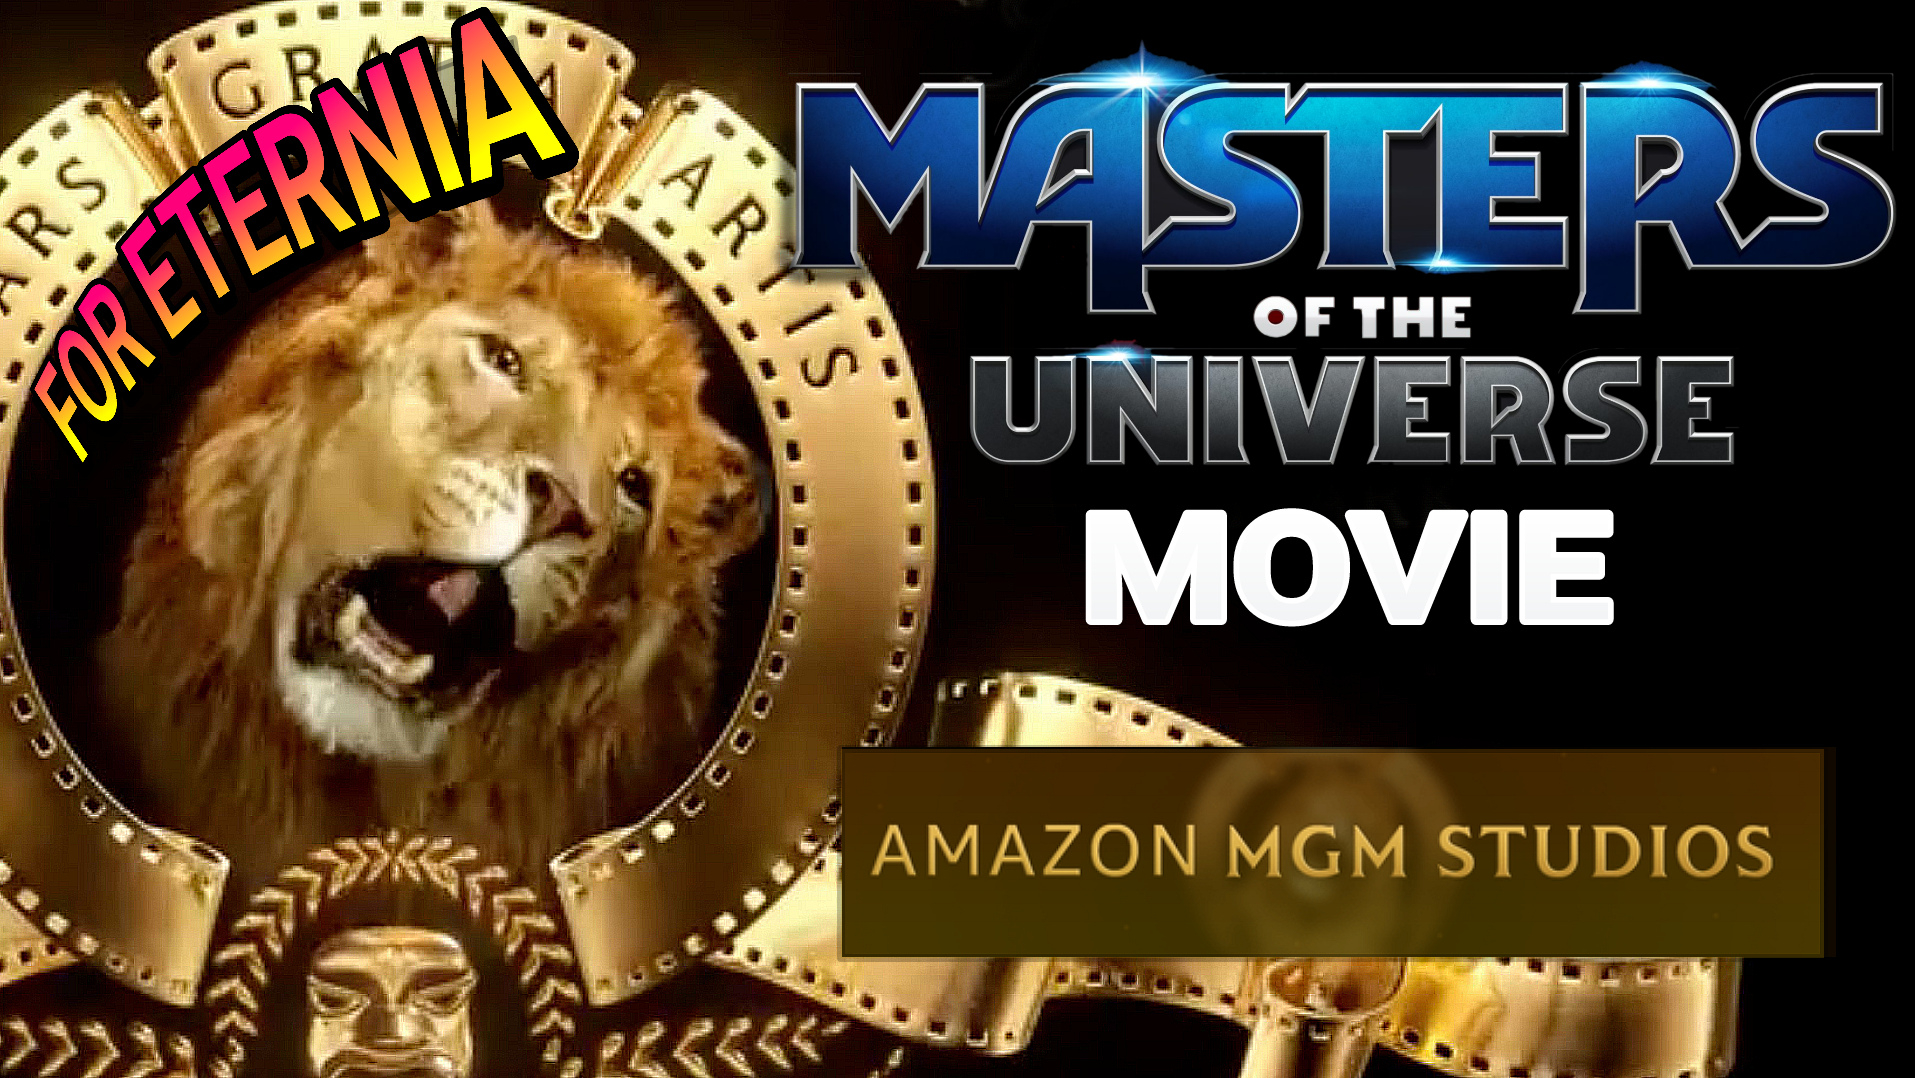 MOVIE NEWS! Amazon MGM Studios in talks to make live-action MASTERS OF THE UNIVERSE Film for a Theatrical Release!